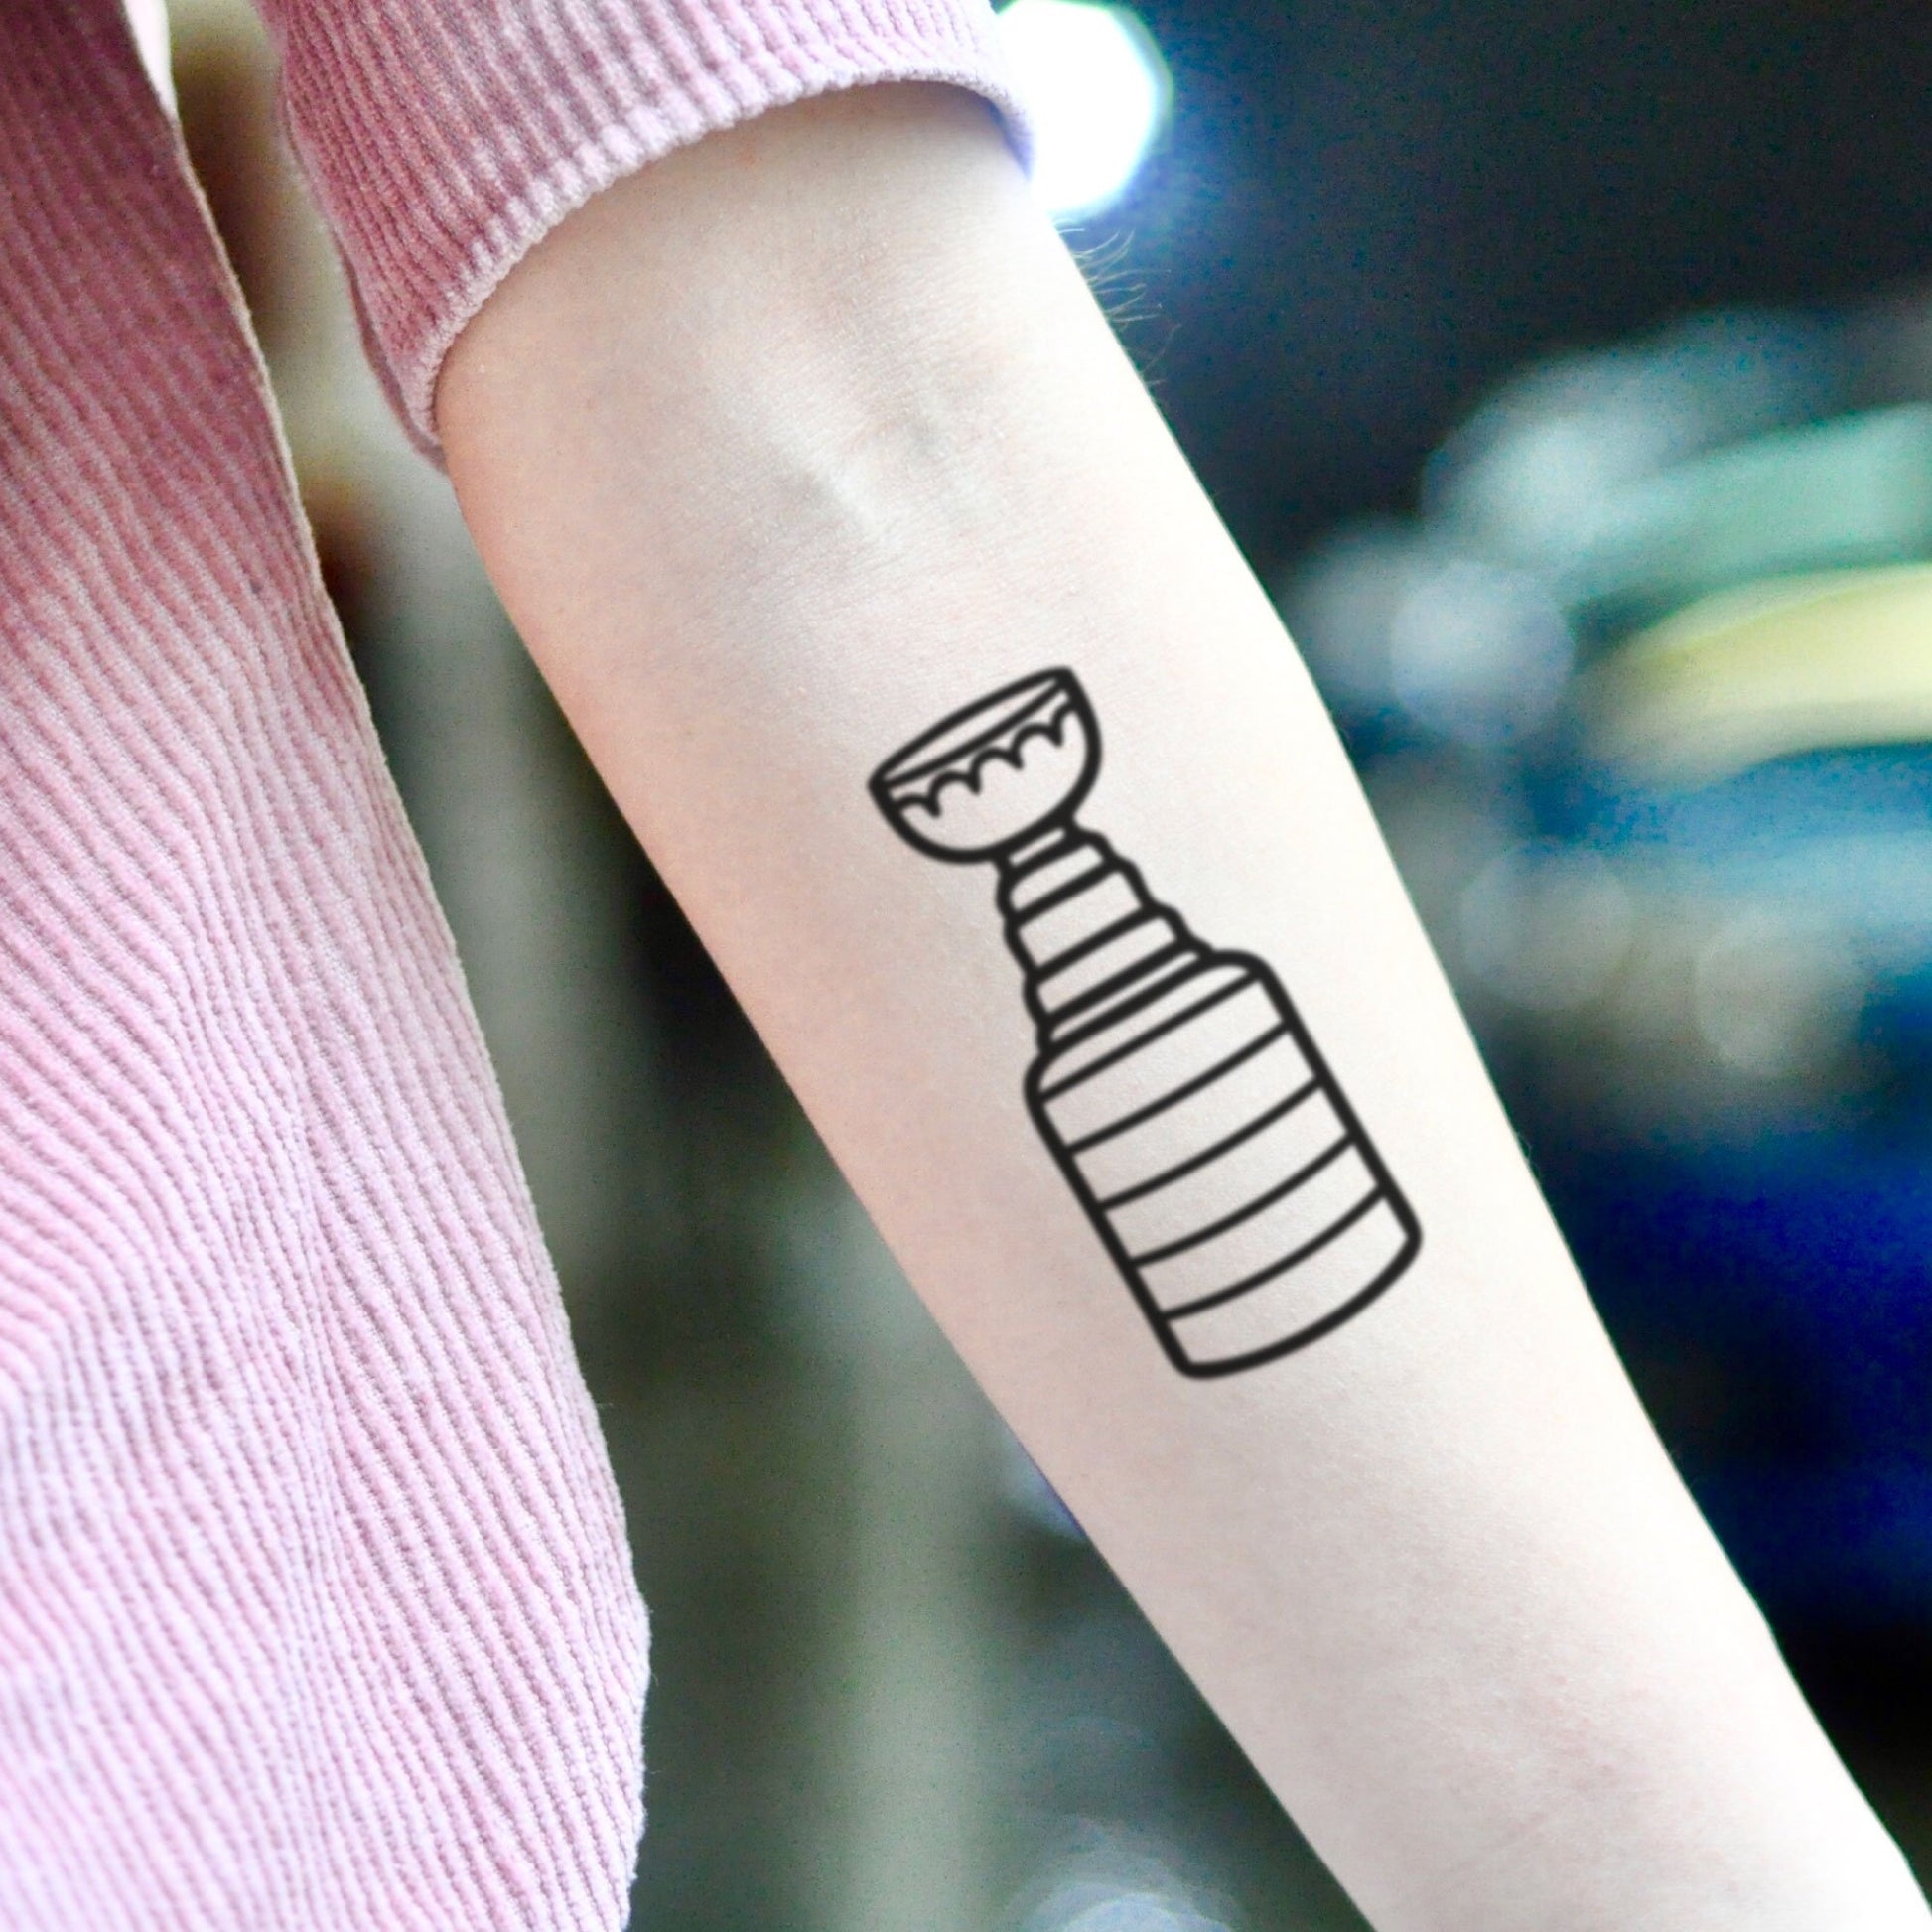 fake small stanley cup outline minimalist temporary tattoo sticker design idea on inner arm